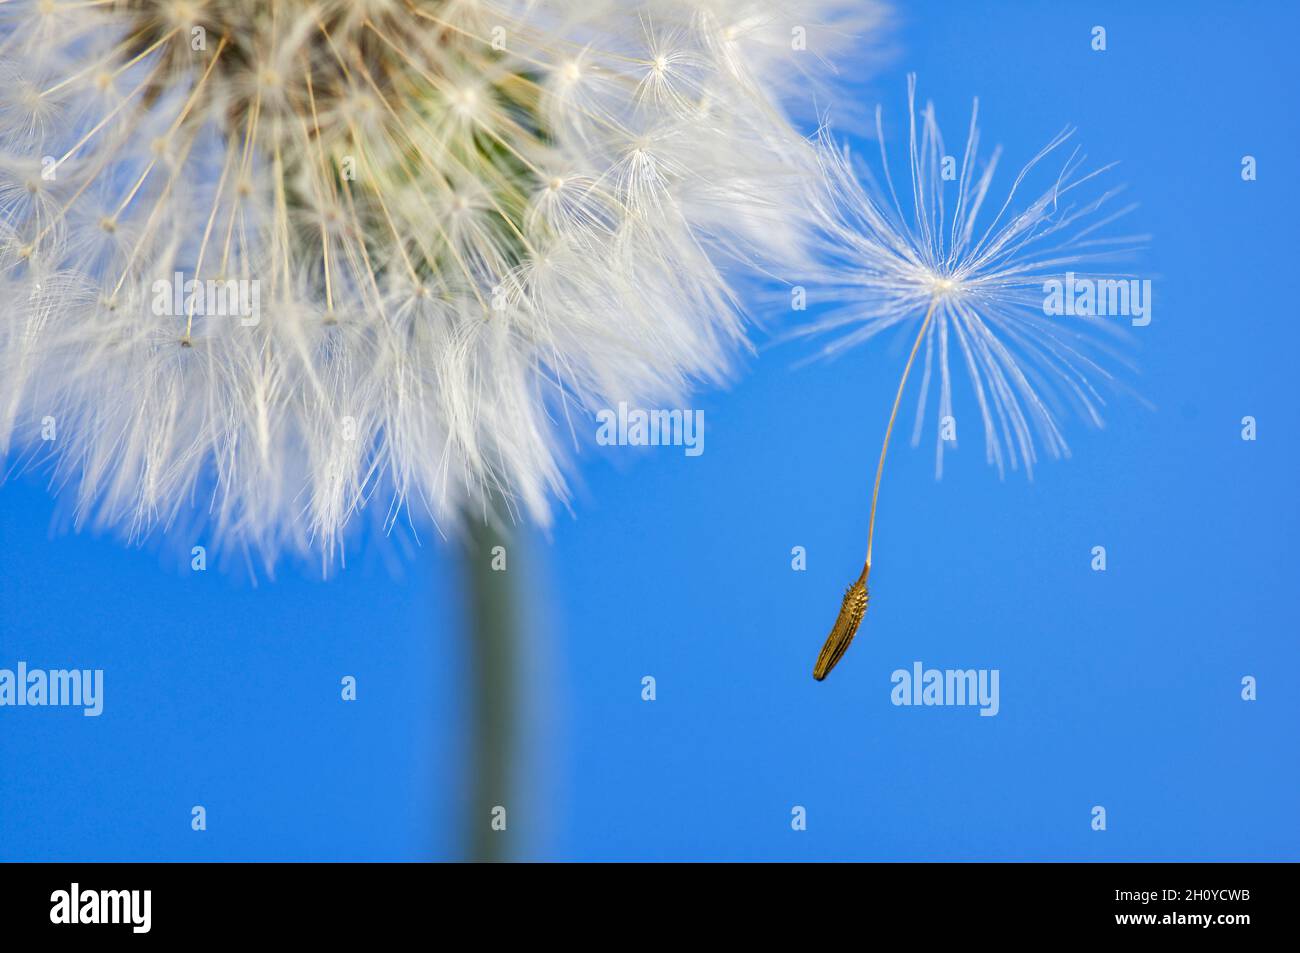 Single dandelion seed leaving the flower head against blue background, concept of leaving home of standing out Stock Photo